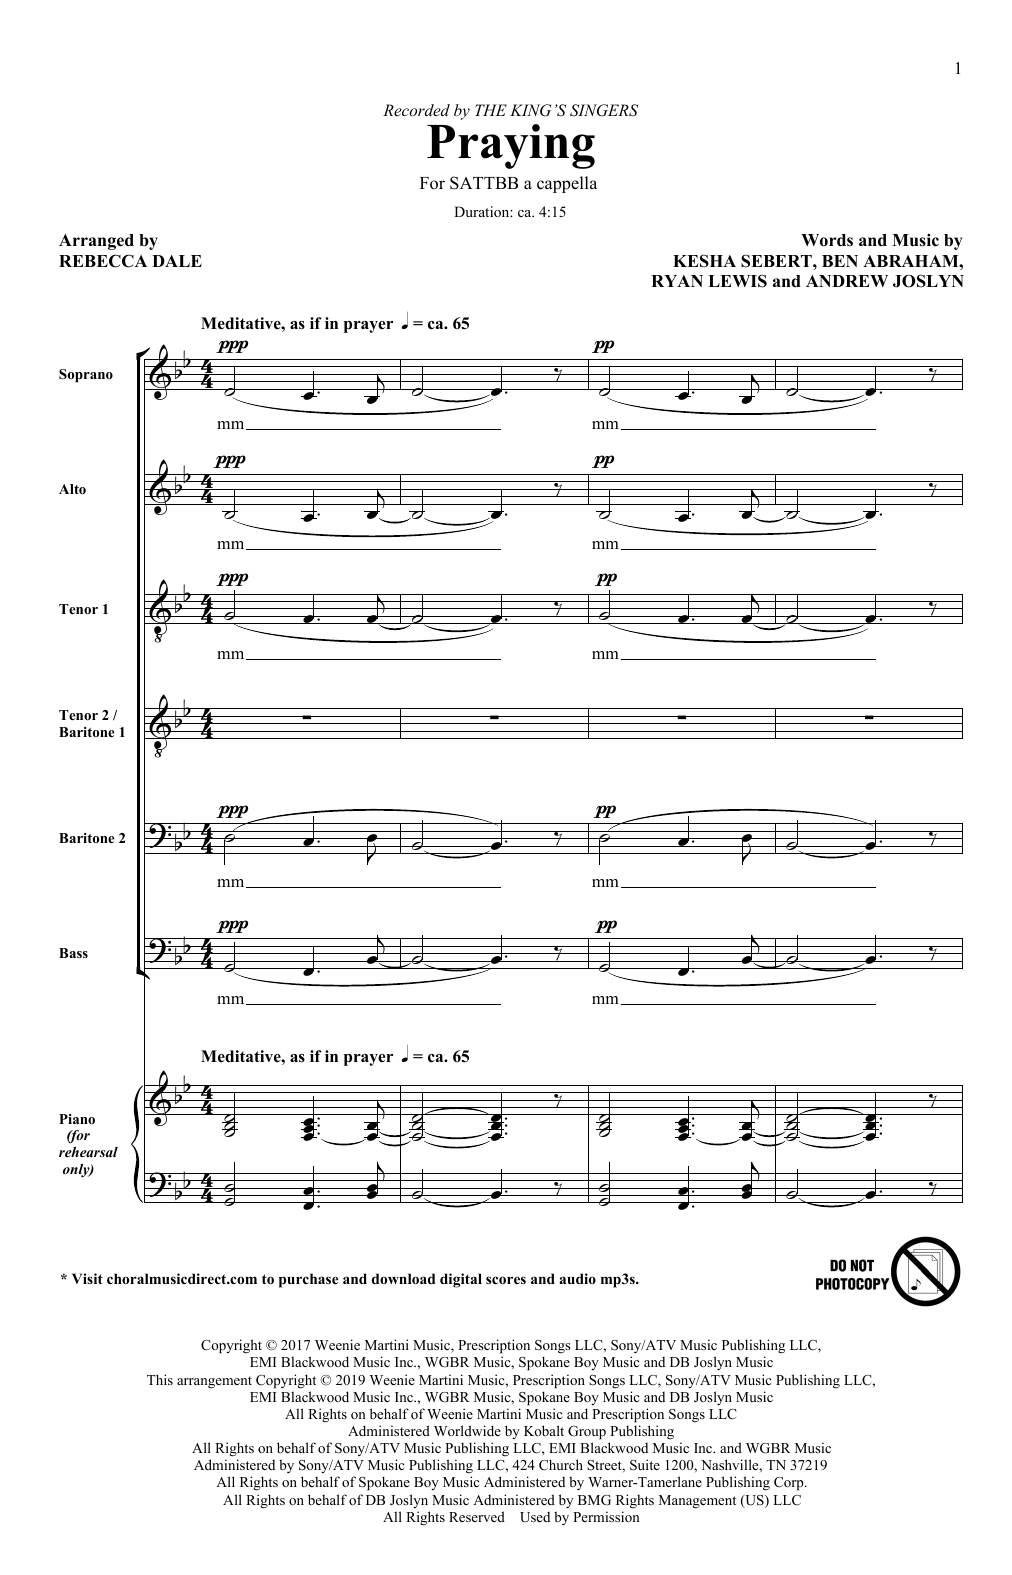 Download The King's Singers Praying (arr. Rebecca Dale) Sheet Music